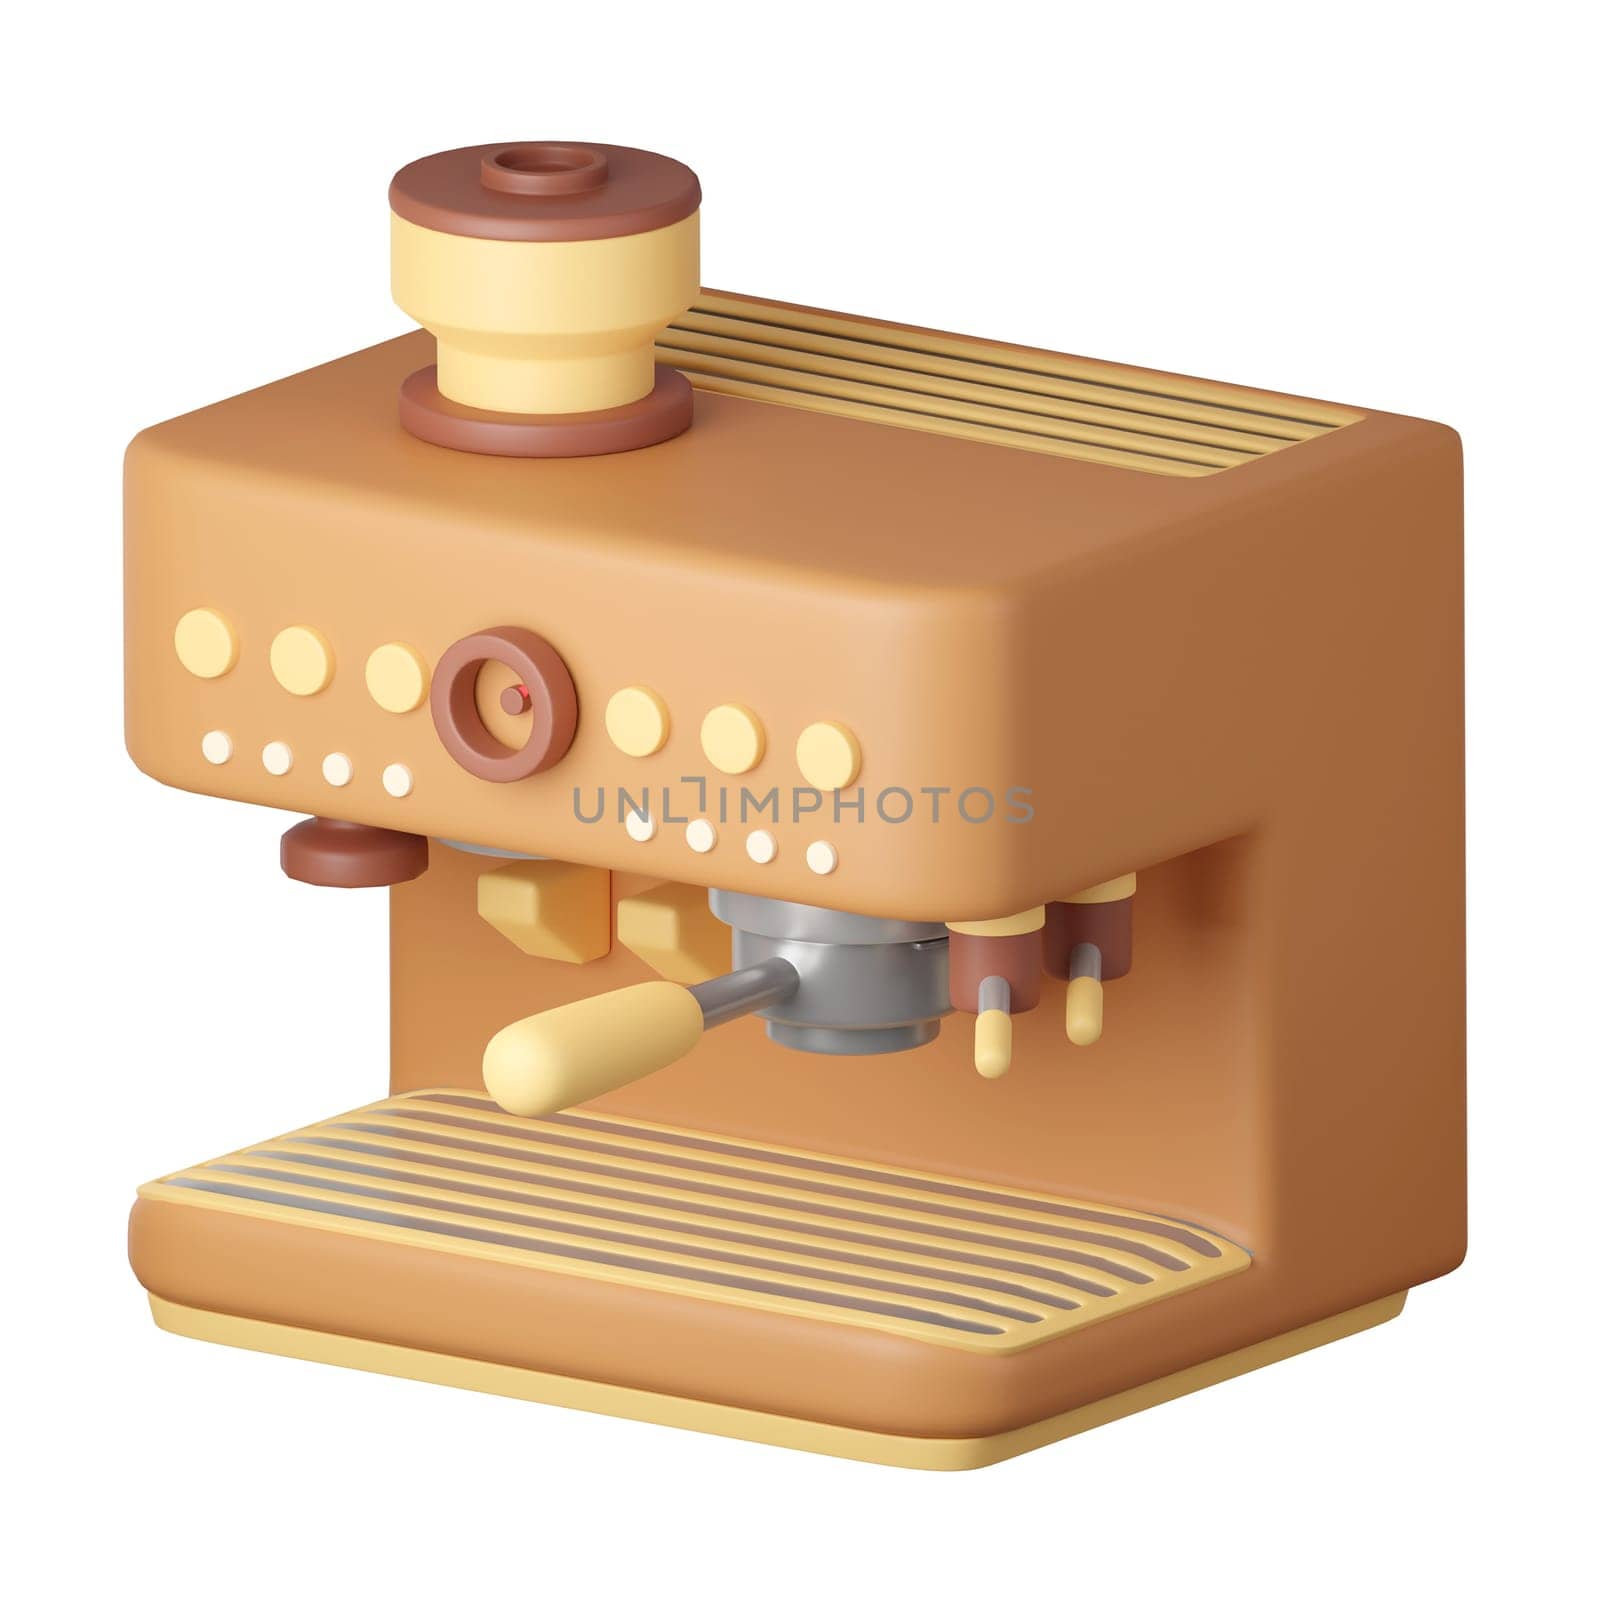 Coffee Machine Cartoon Style Isolated on a White Background. 3d illustration by meepiangraphic